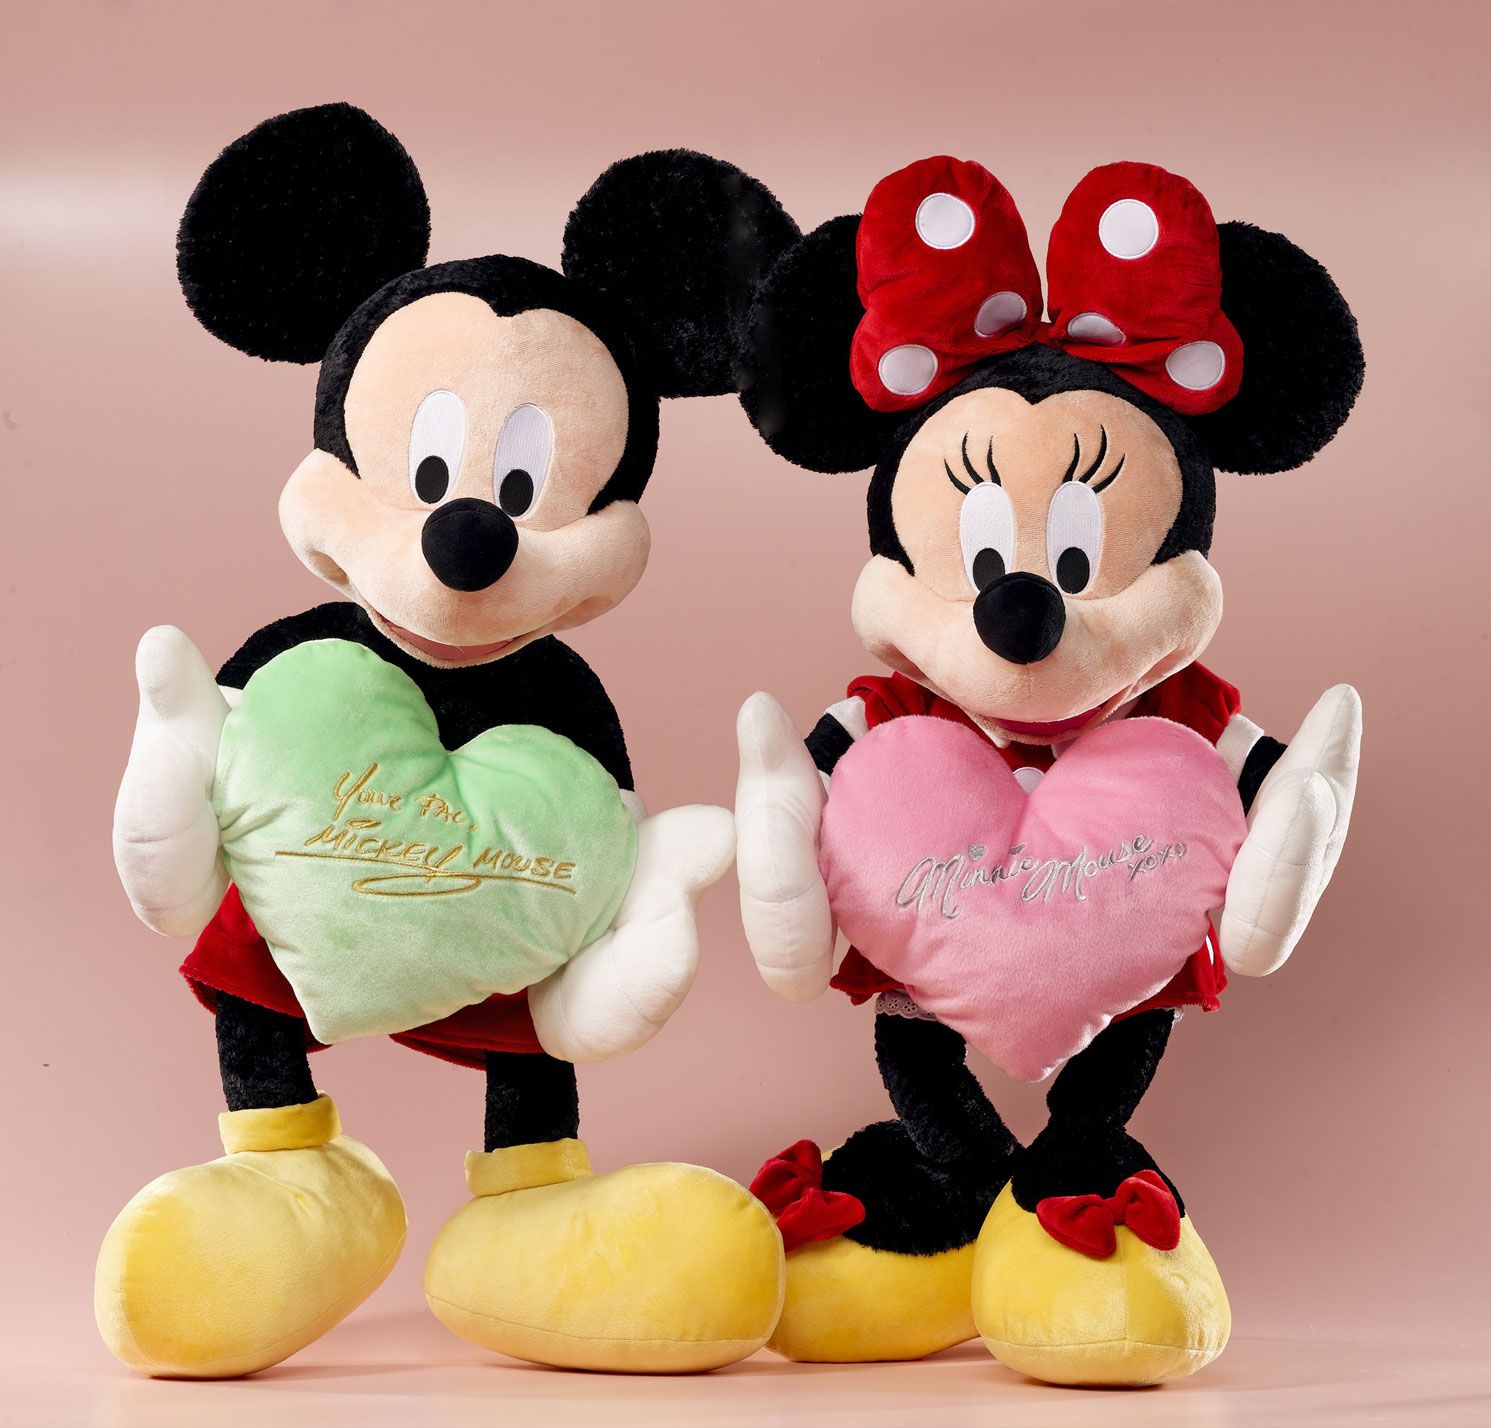 1491x1428 Free Mickey Mouse And Minnie Mouse Love, Download Free Clip Art on WallpaperBat